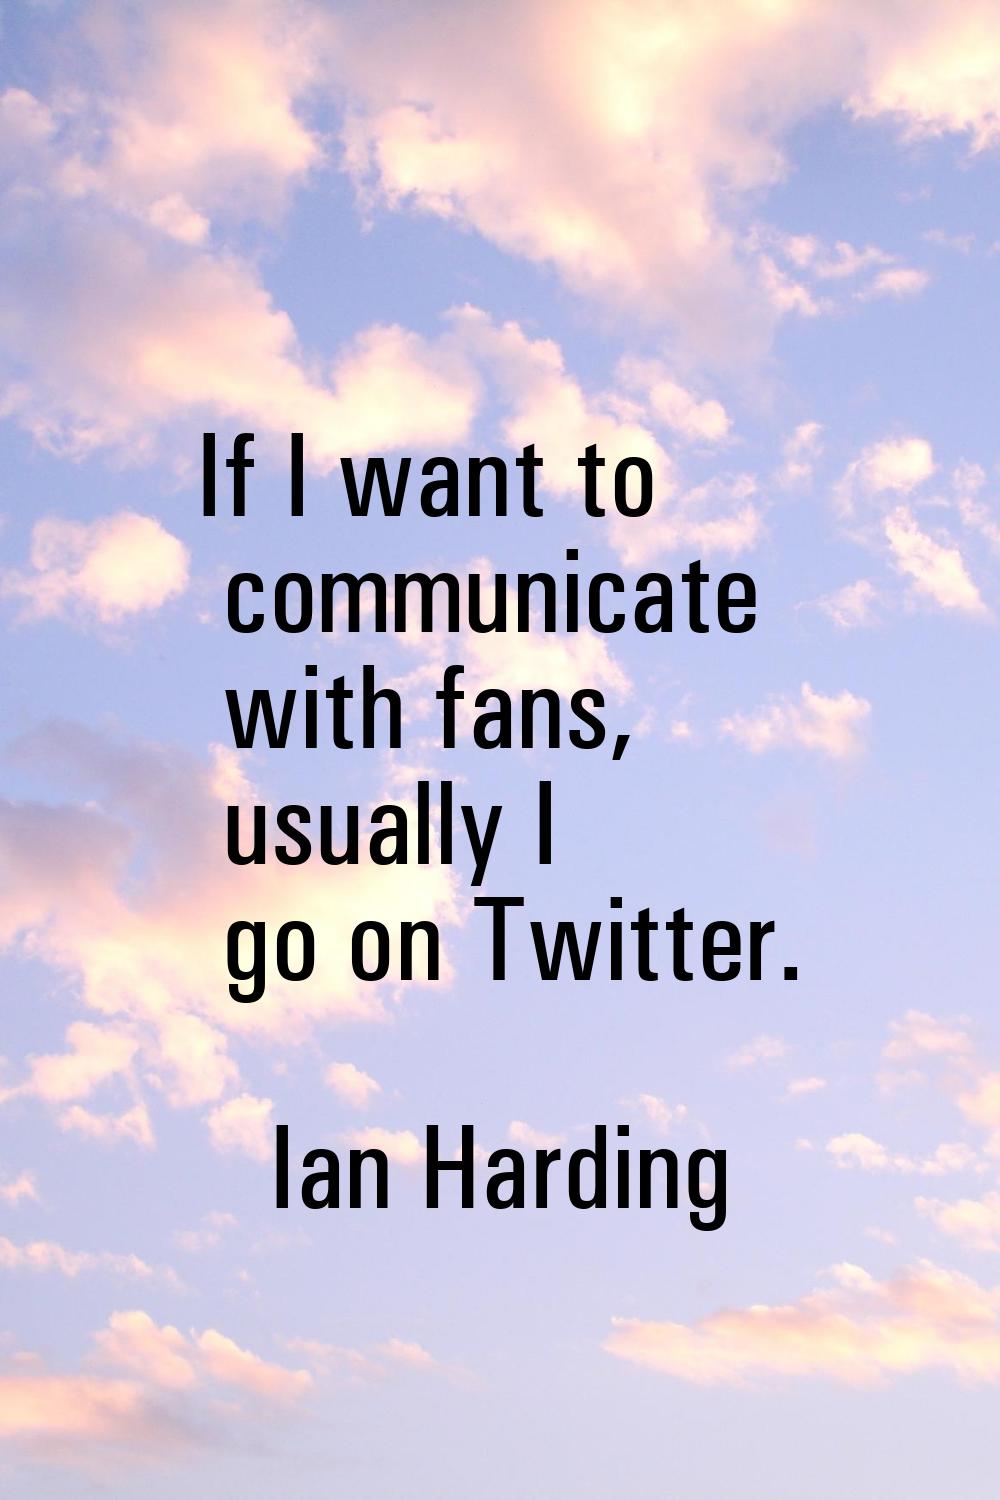 If I want to communicate with fans, usually I go on Twitter.